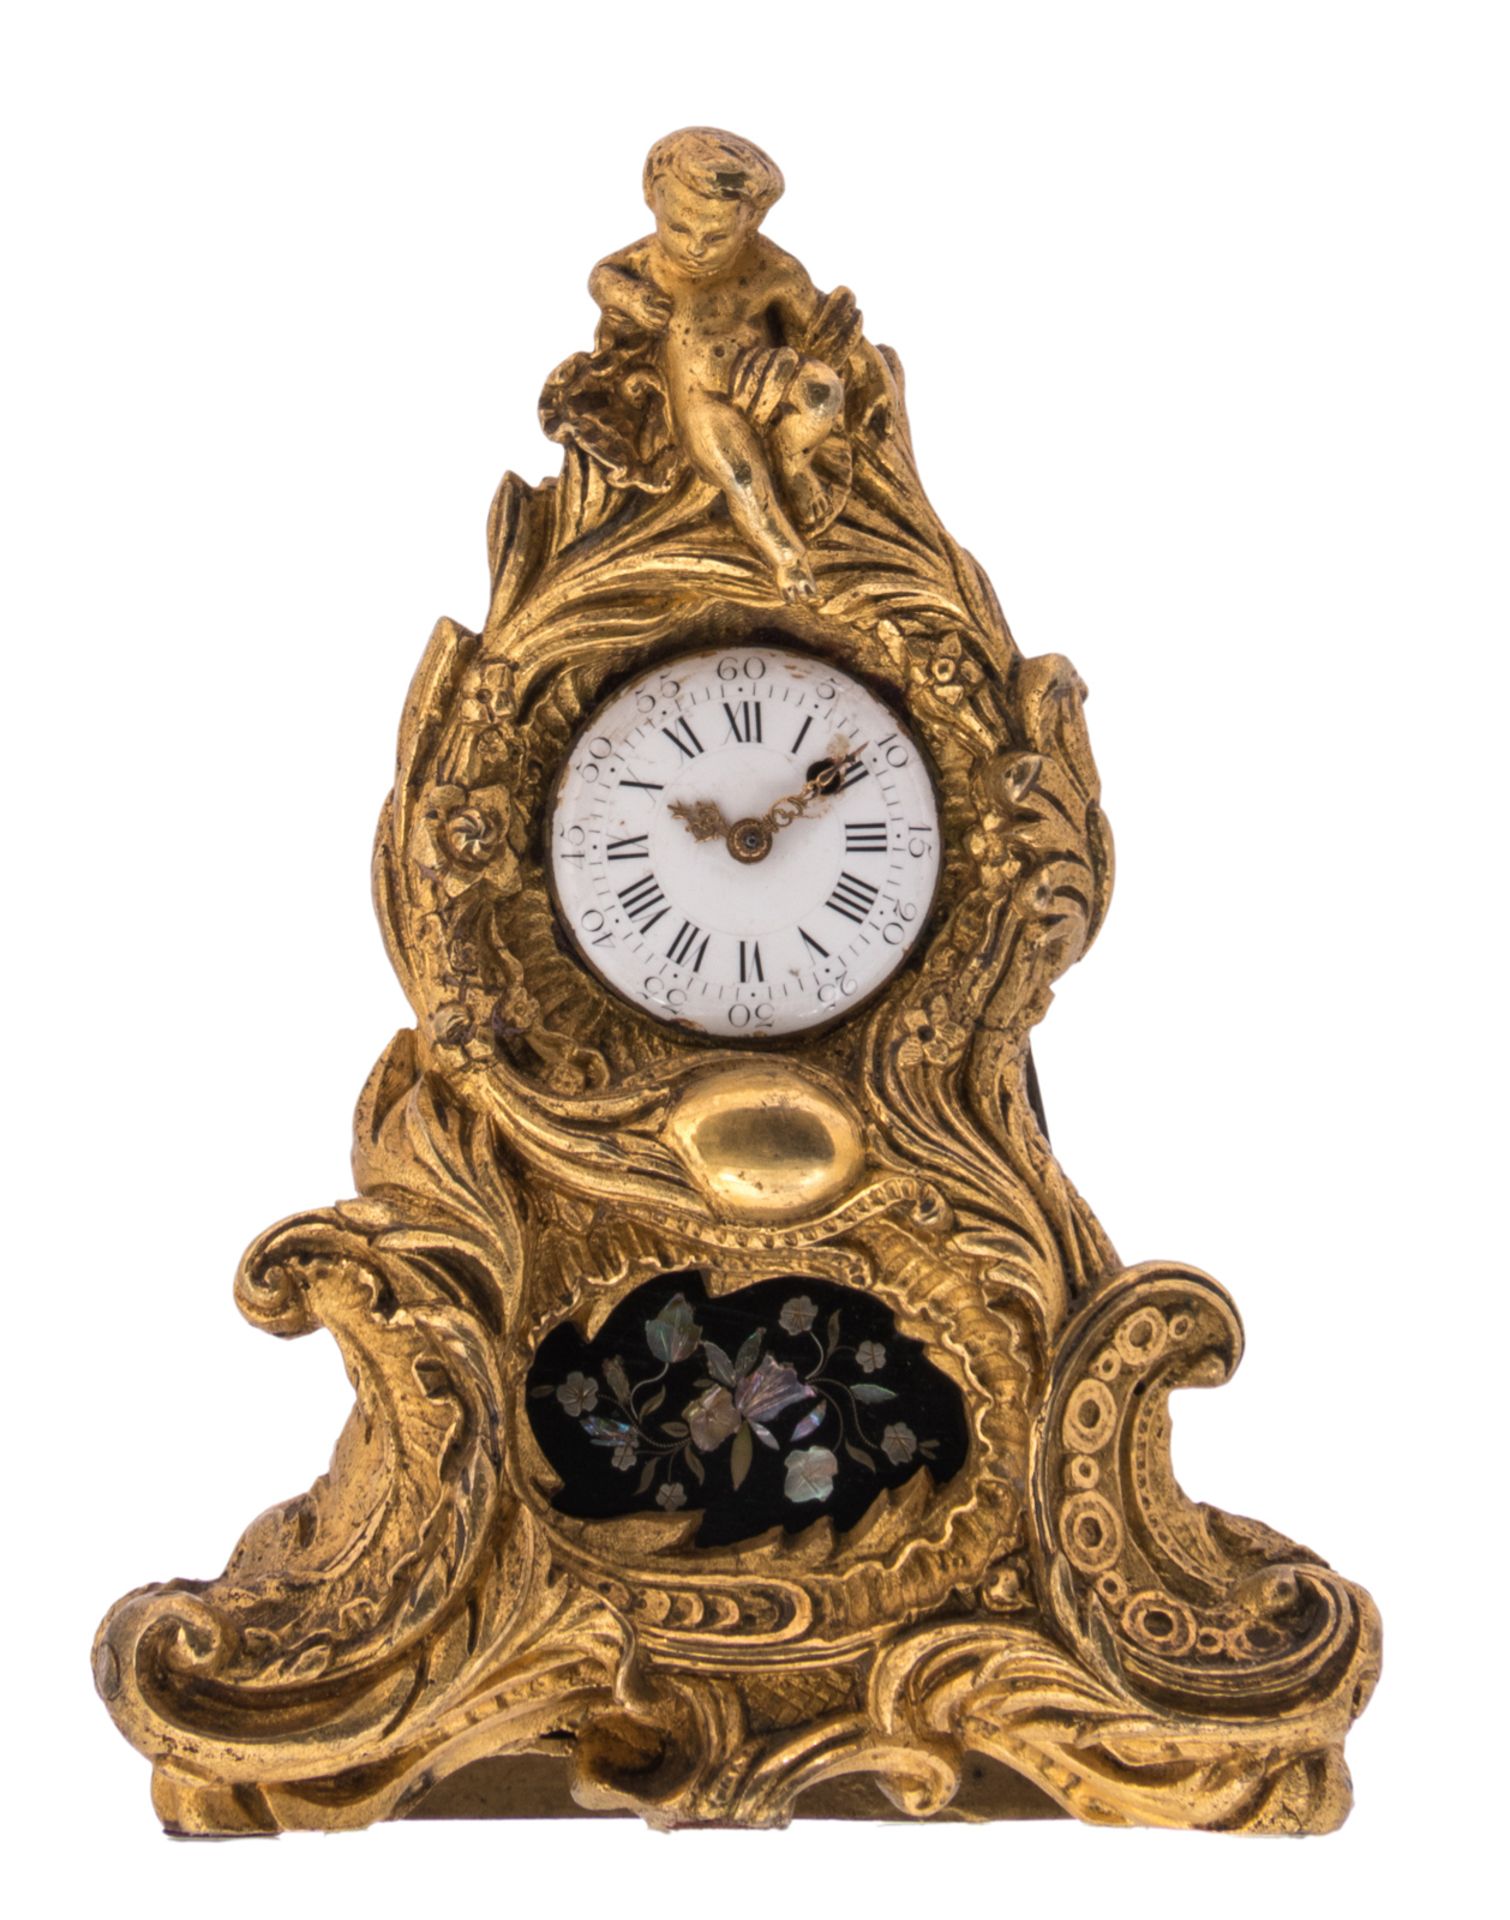 A probably French and 18thC Rococo style table clock, gilt bronze and a tole plate with mother of